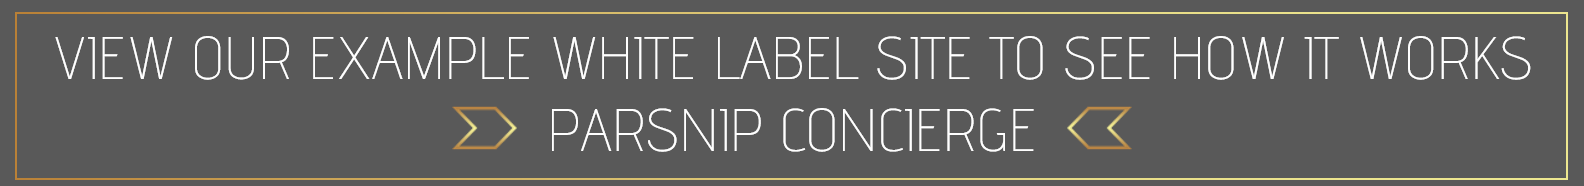 see an exmaple white label concierge and how it works ncluding pricing